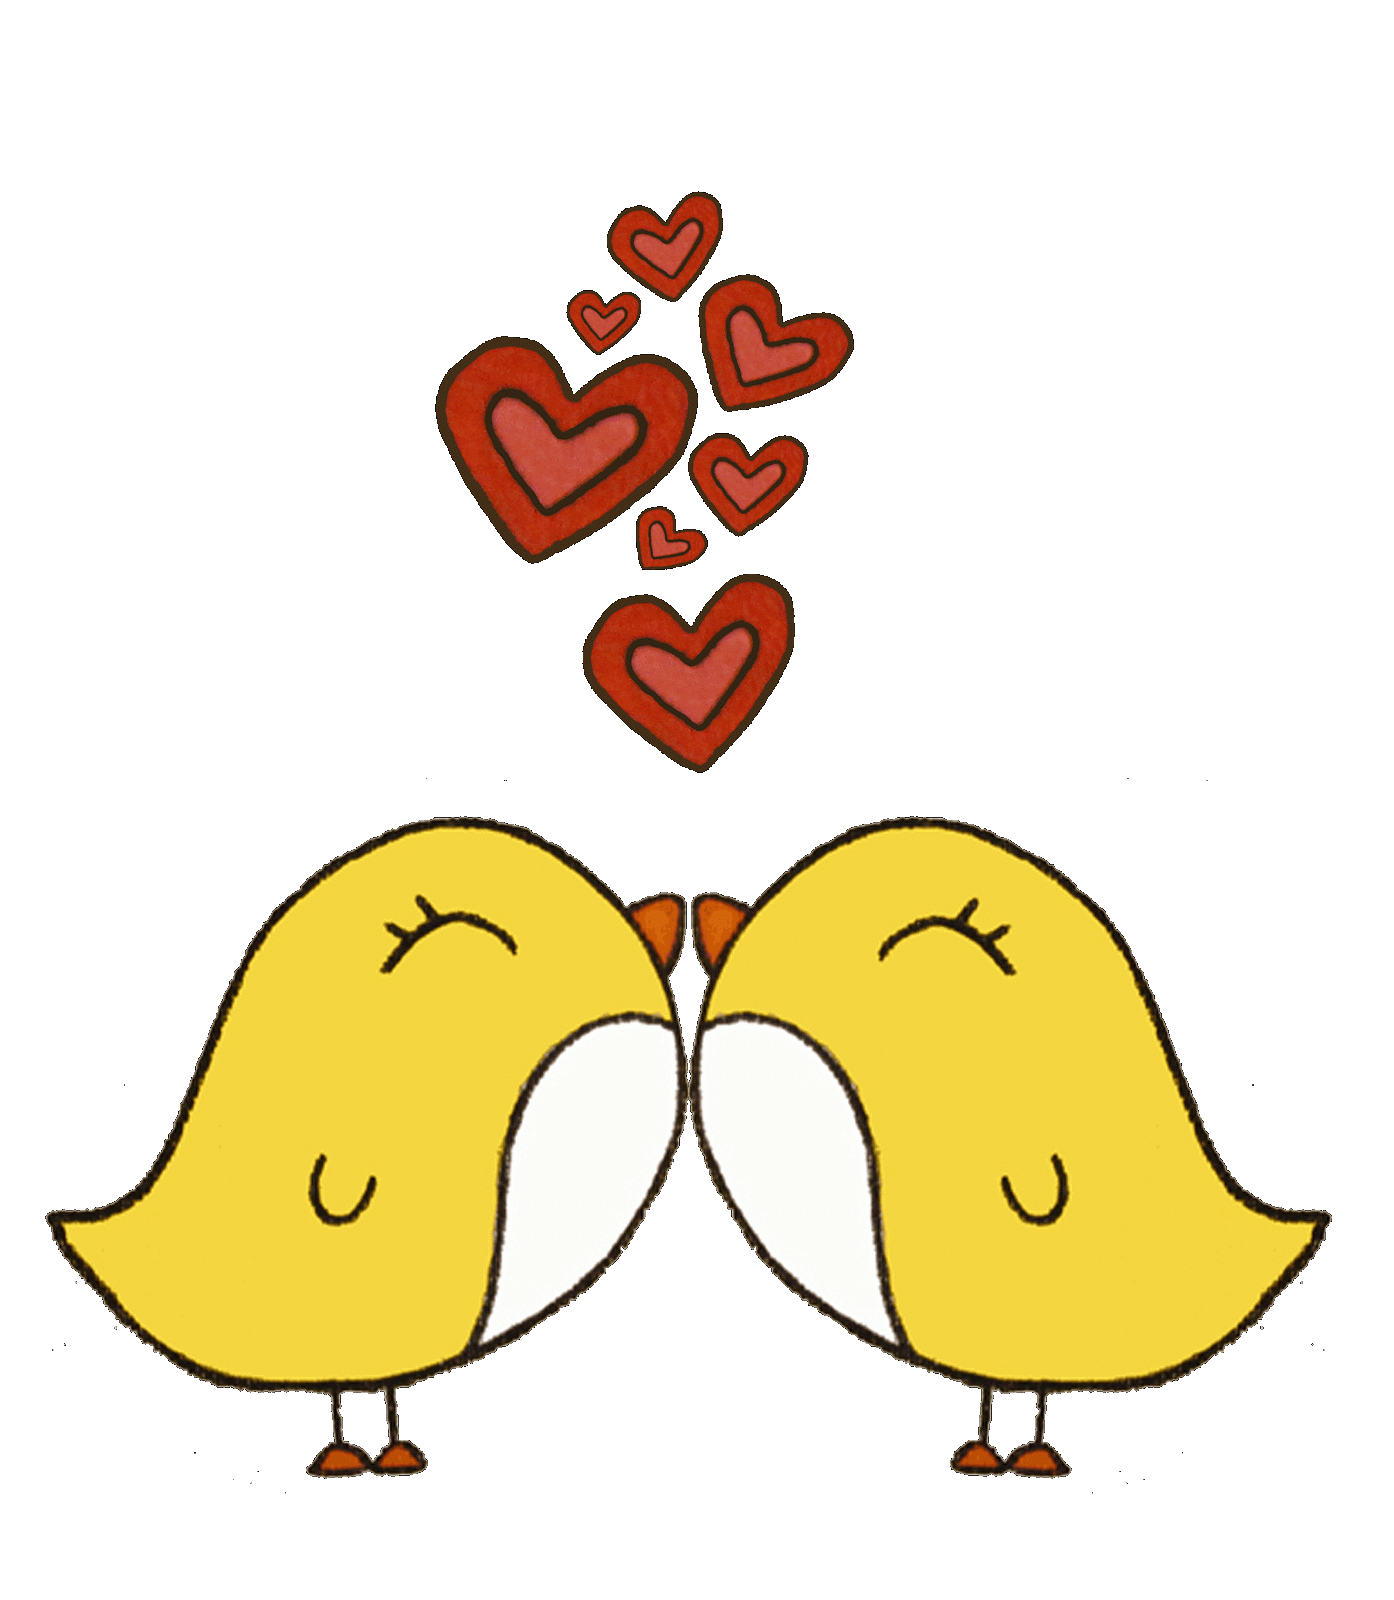 Love sms clipart free download - ClipartFox